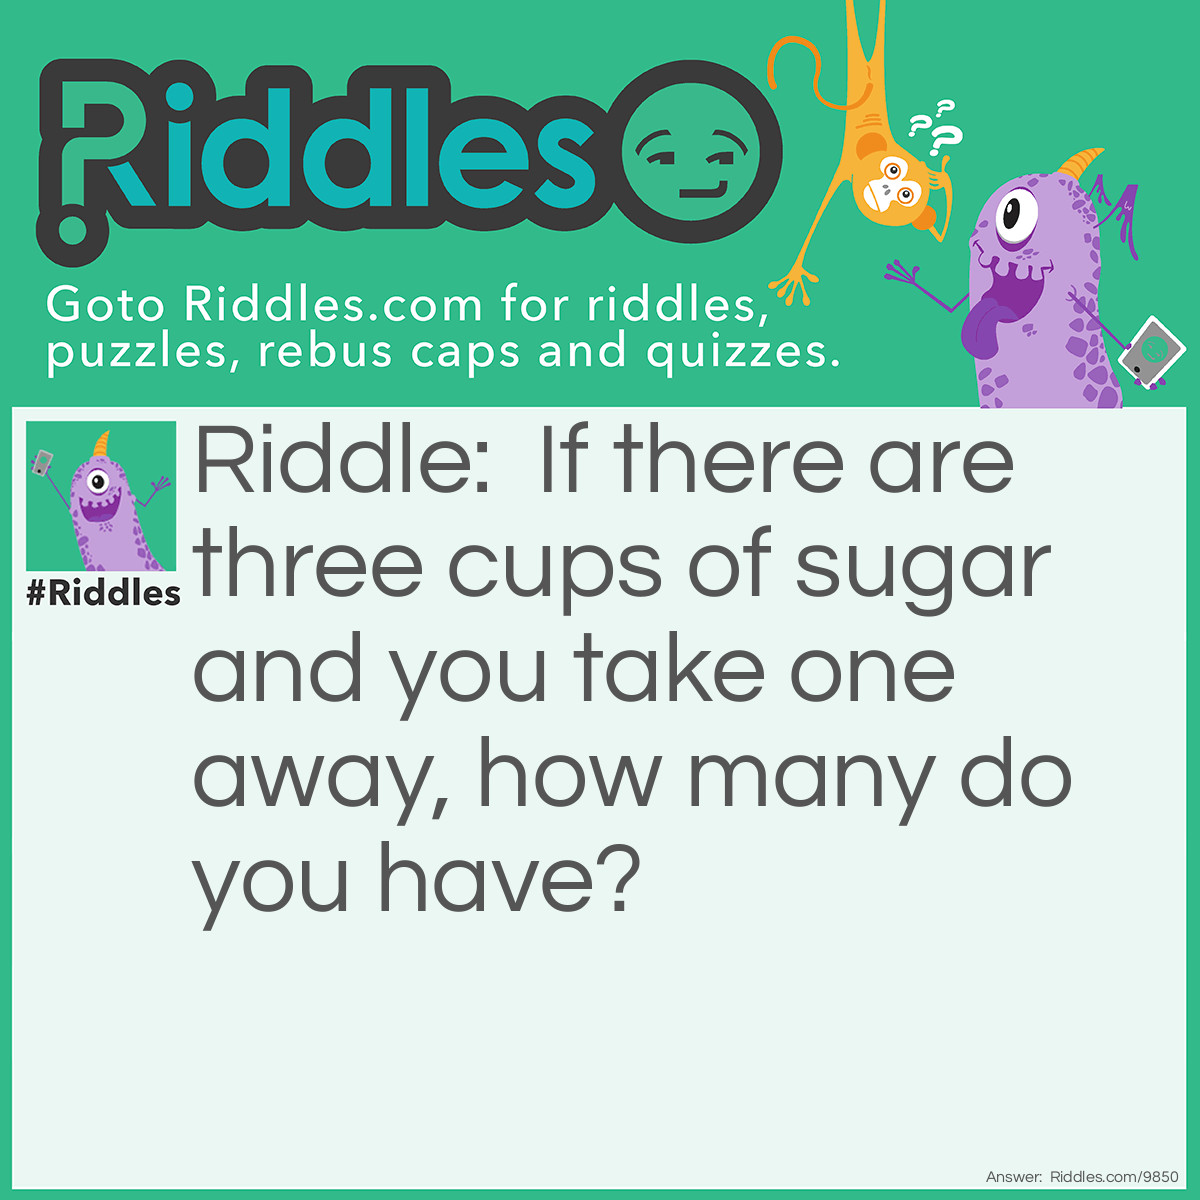 Riddle: If there are three cups of sugar and you take one away, how many do you have? Answer: One, as that is the only one you took away and that is all that you have. The rest still remain where there were.